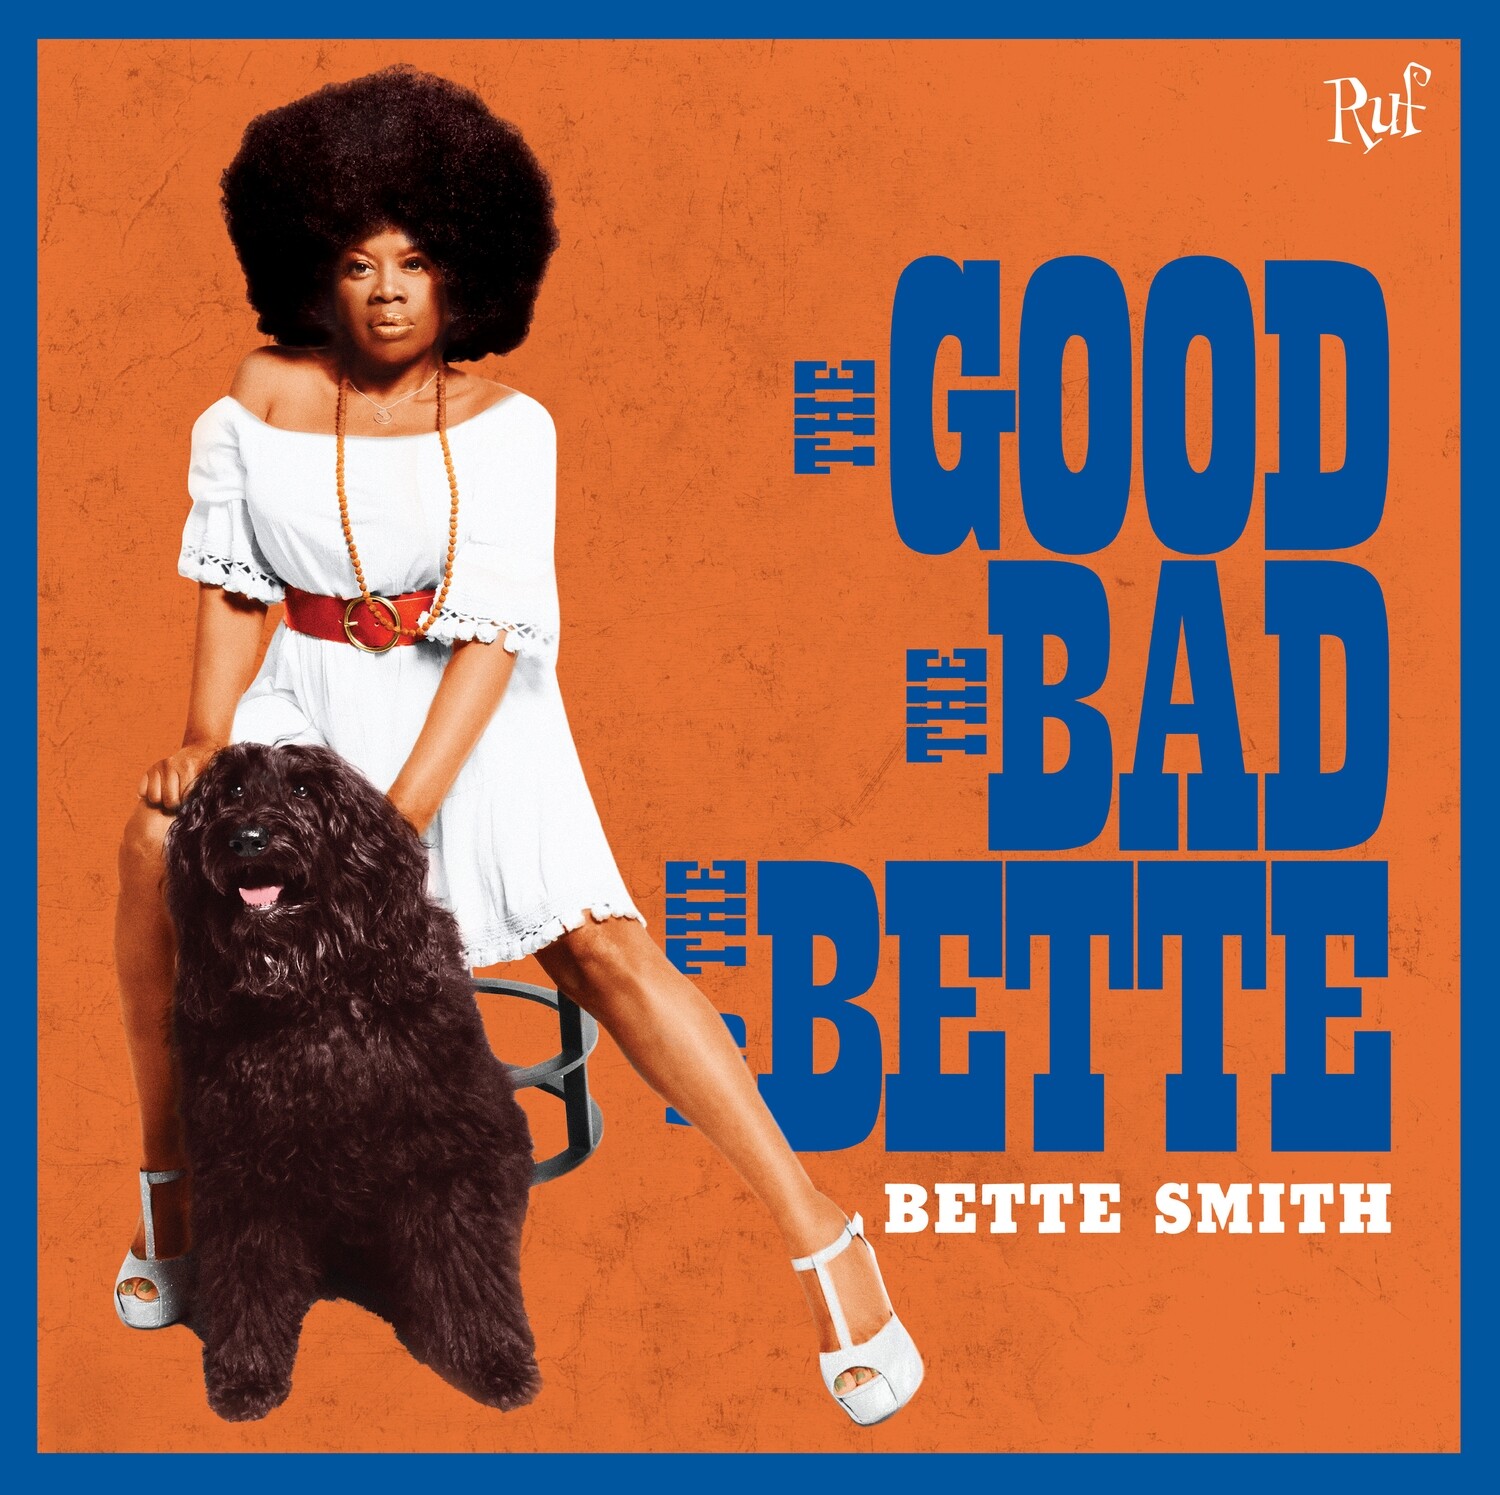 Bette Smith - Limited Edition Vinyl "The Good, The Bad and The Bette" (custom autograph)